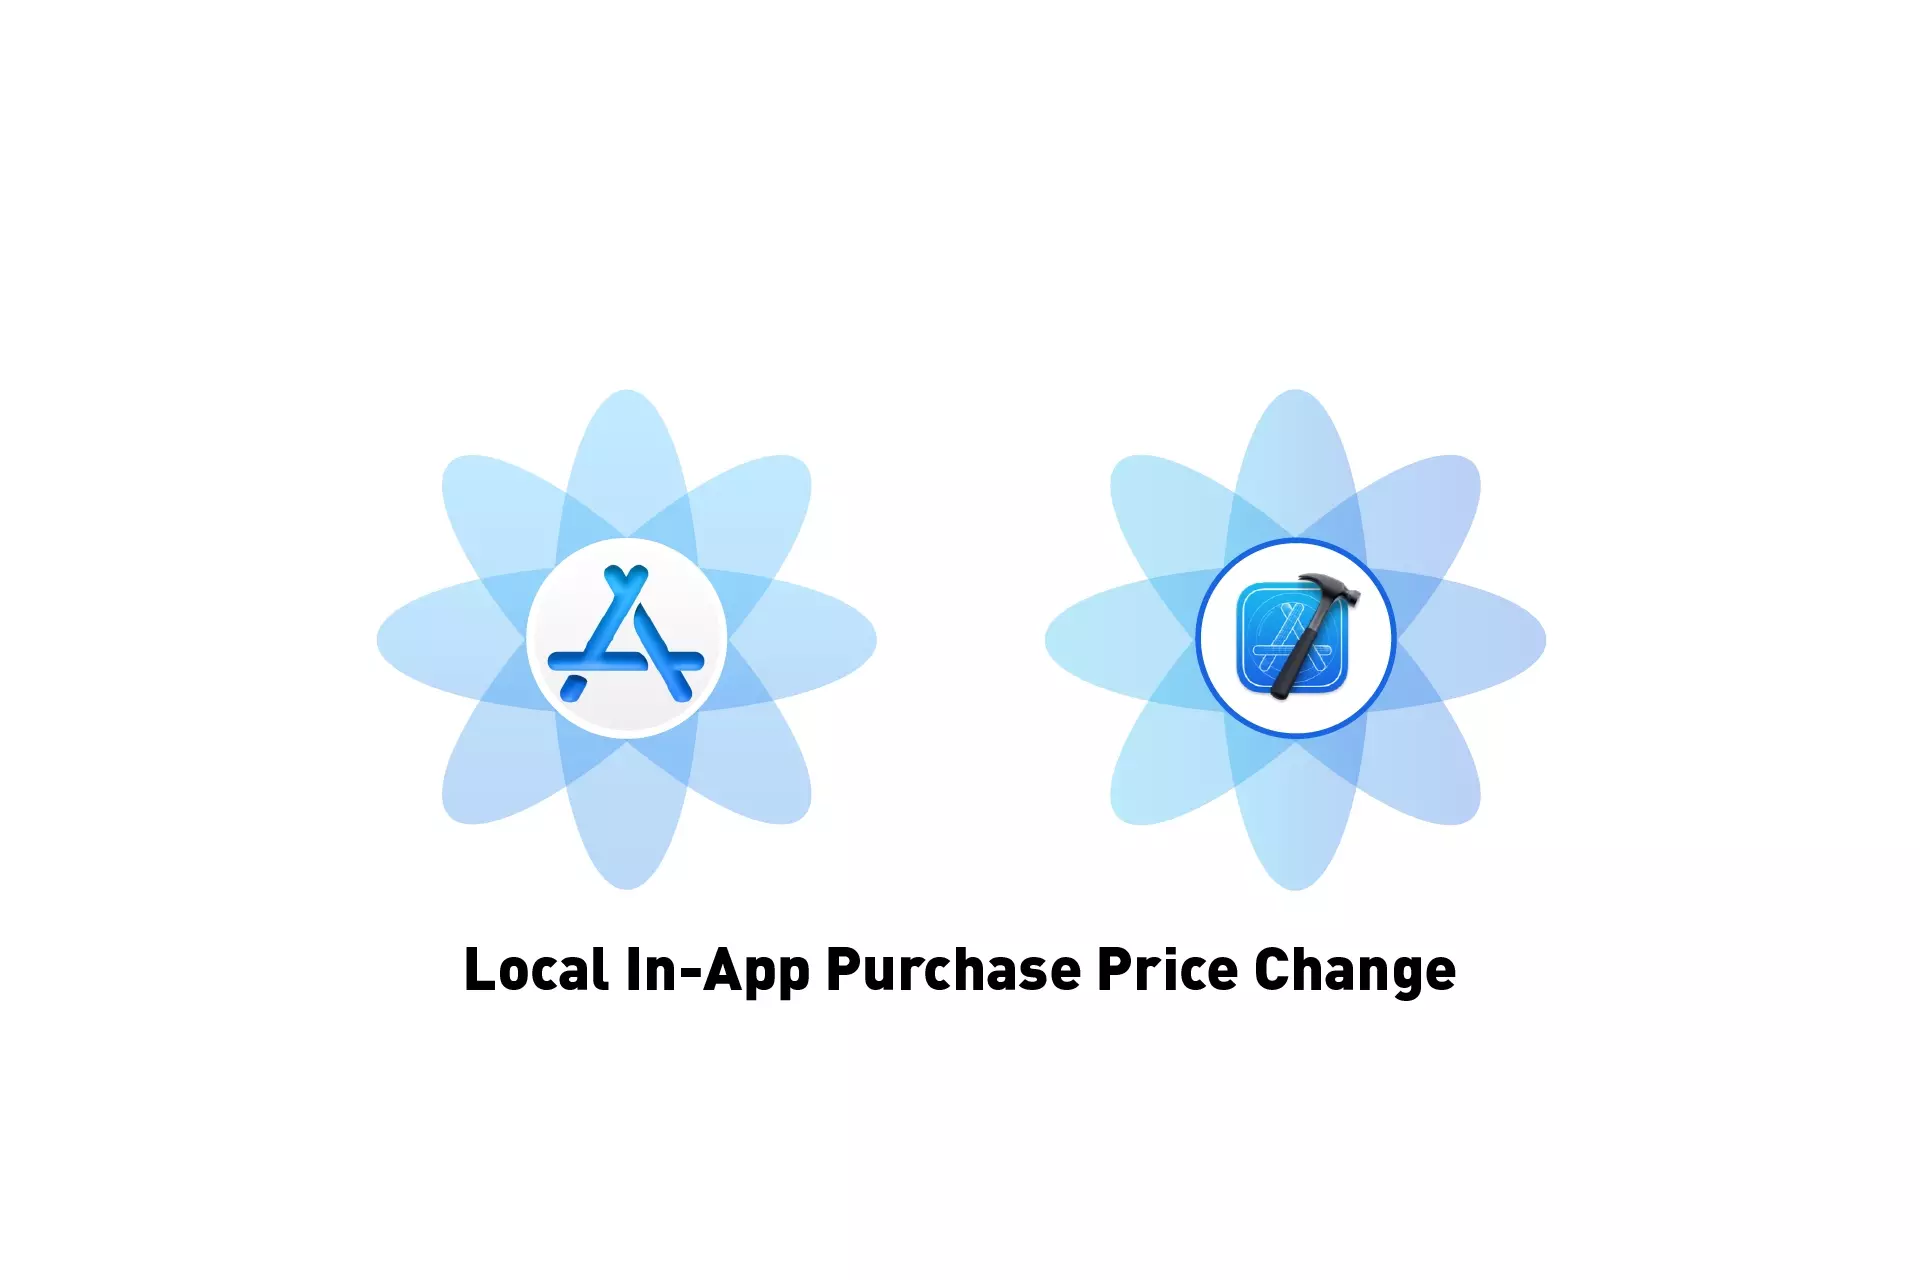 Two flowers that represent StoreKit and Xcode with the text "Local Subscription Price Change" beneath them.